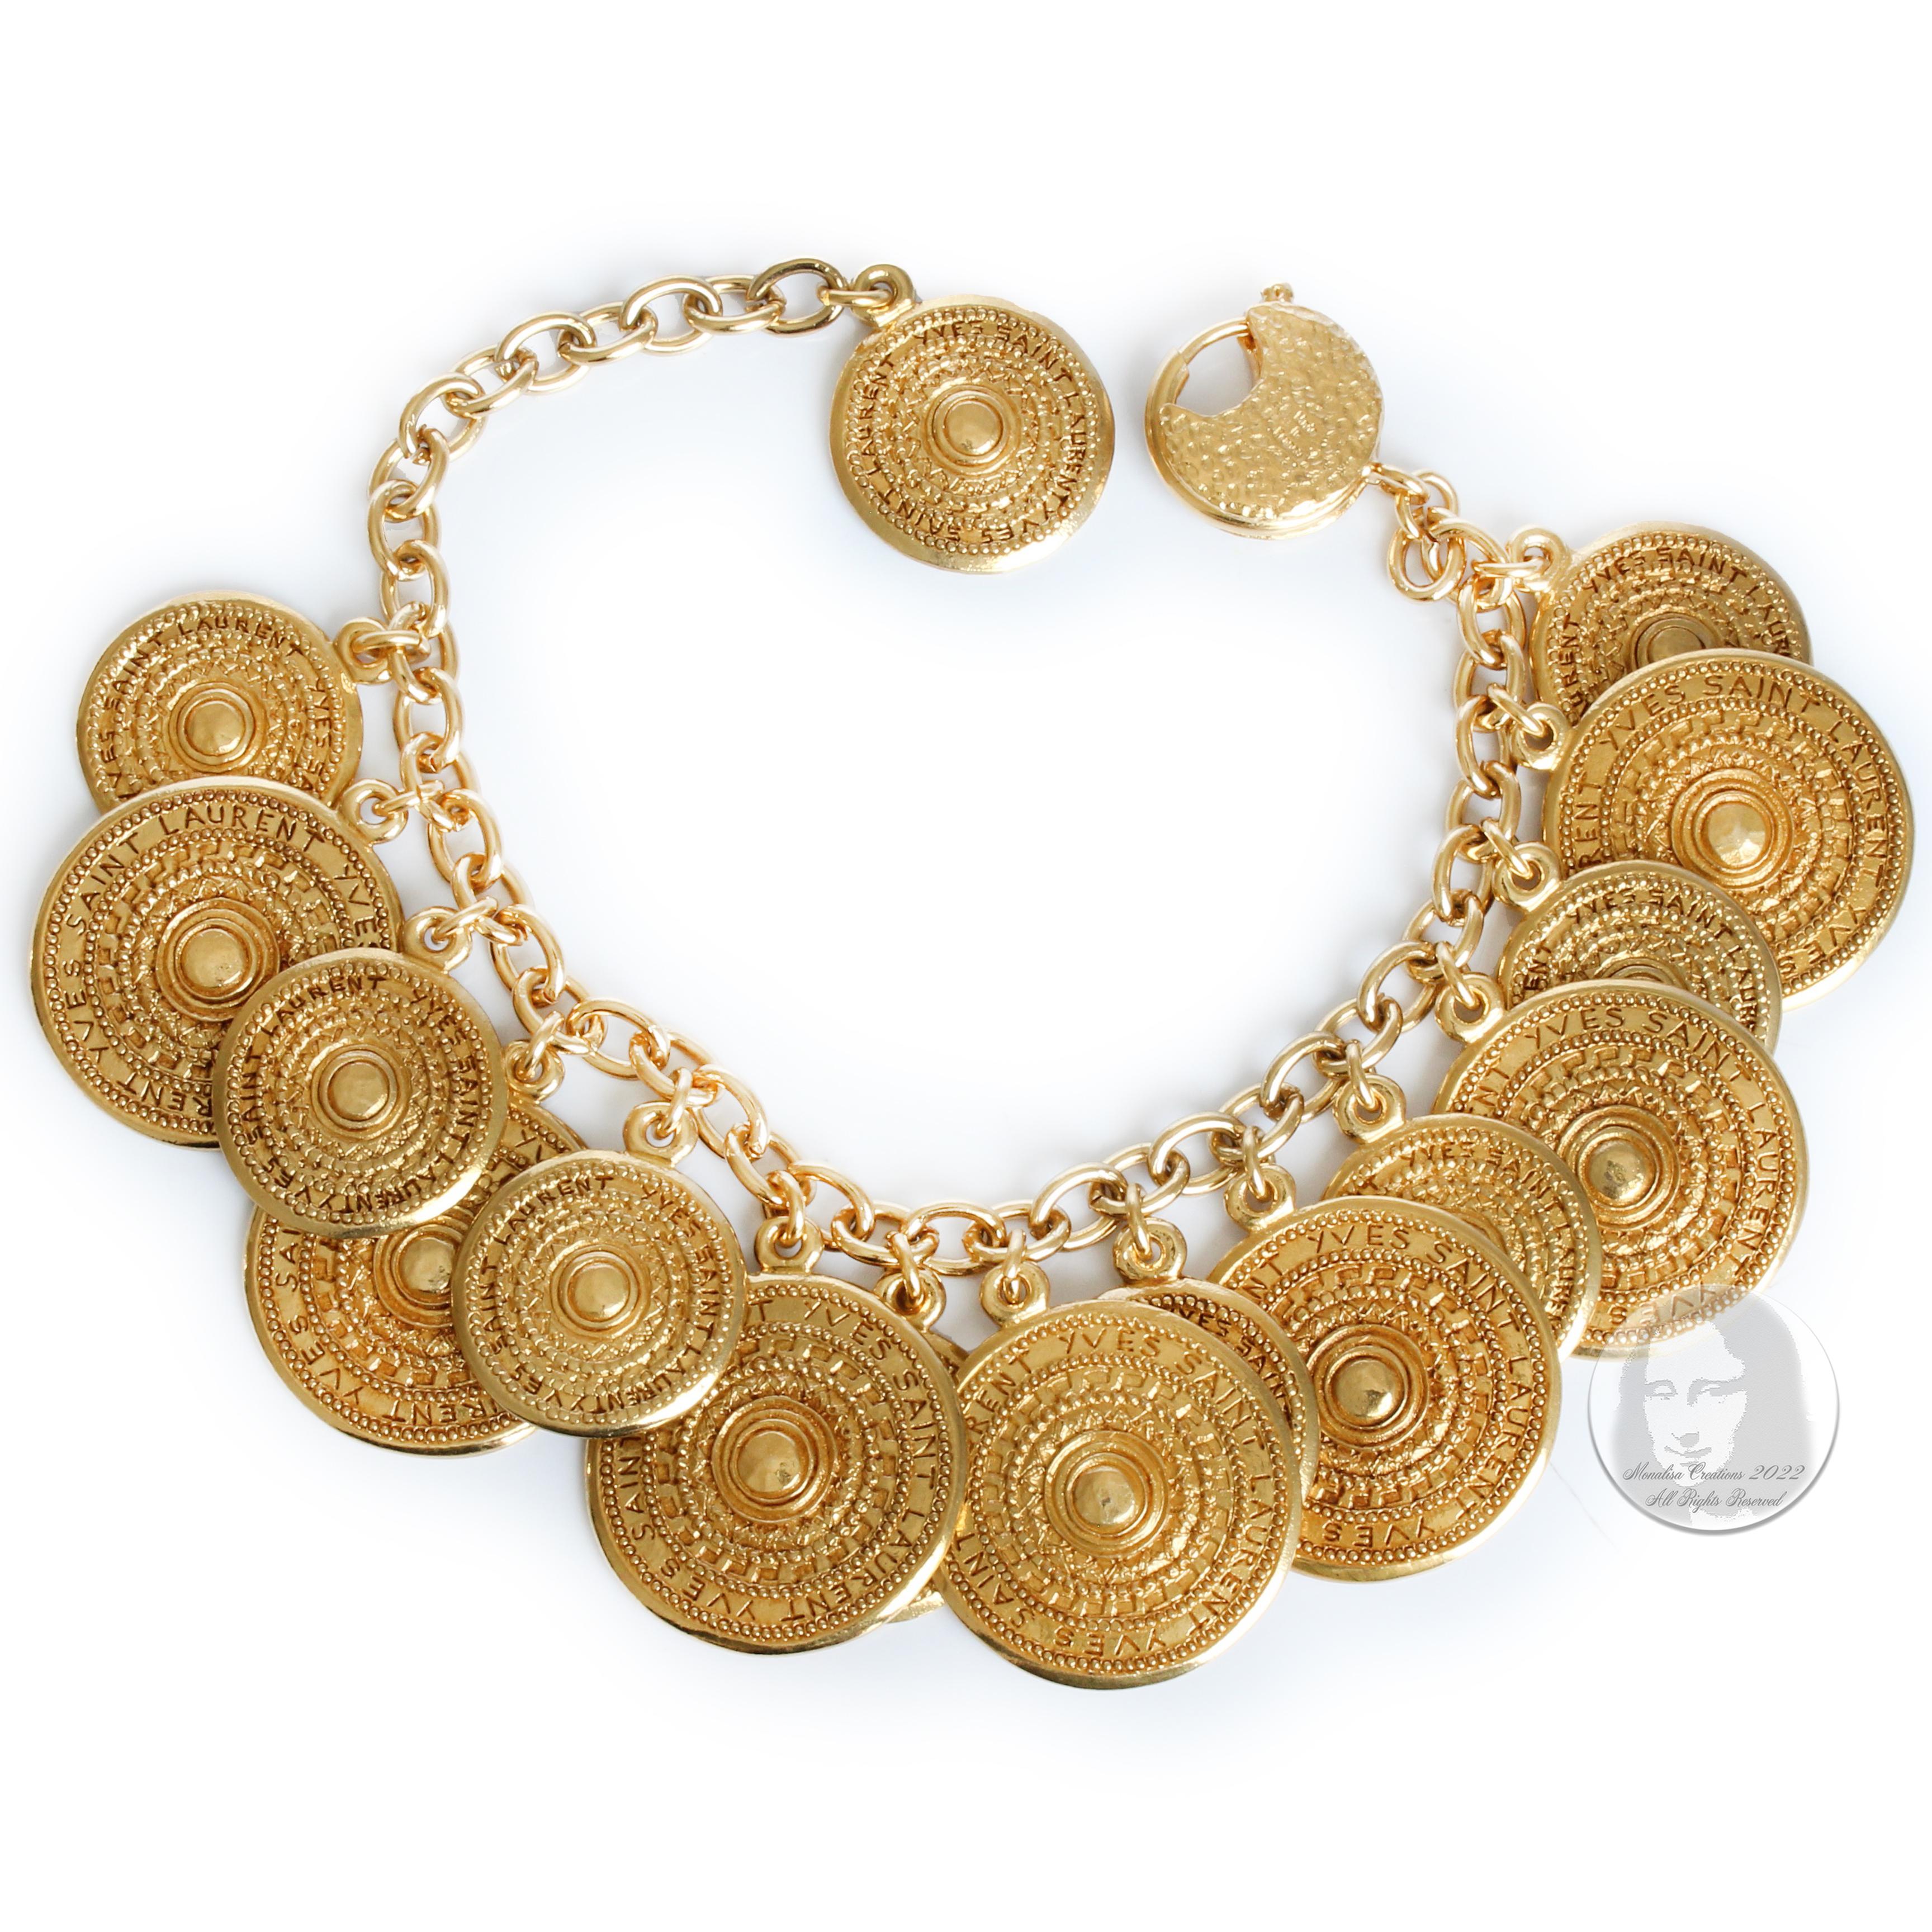 Authentic, preowned, vintage Yves Saint Laurent coin bracelet, most likely made between the late 70s and mid 80s.  A similar style coin necklace was worn by actress Farrah Fawcett for Vogue Magazine in 1977.  Made from gold metal, each coin